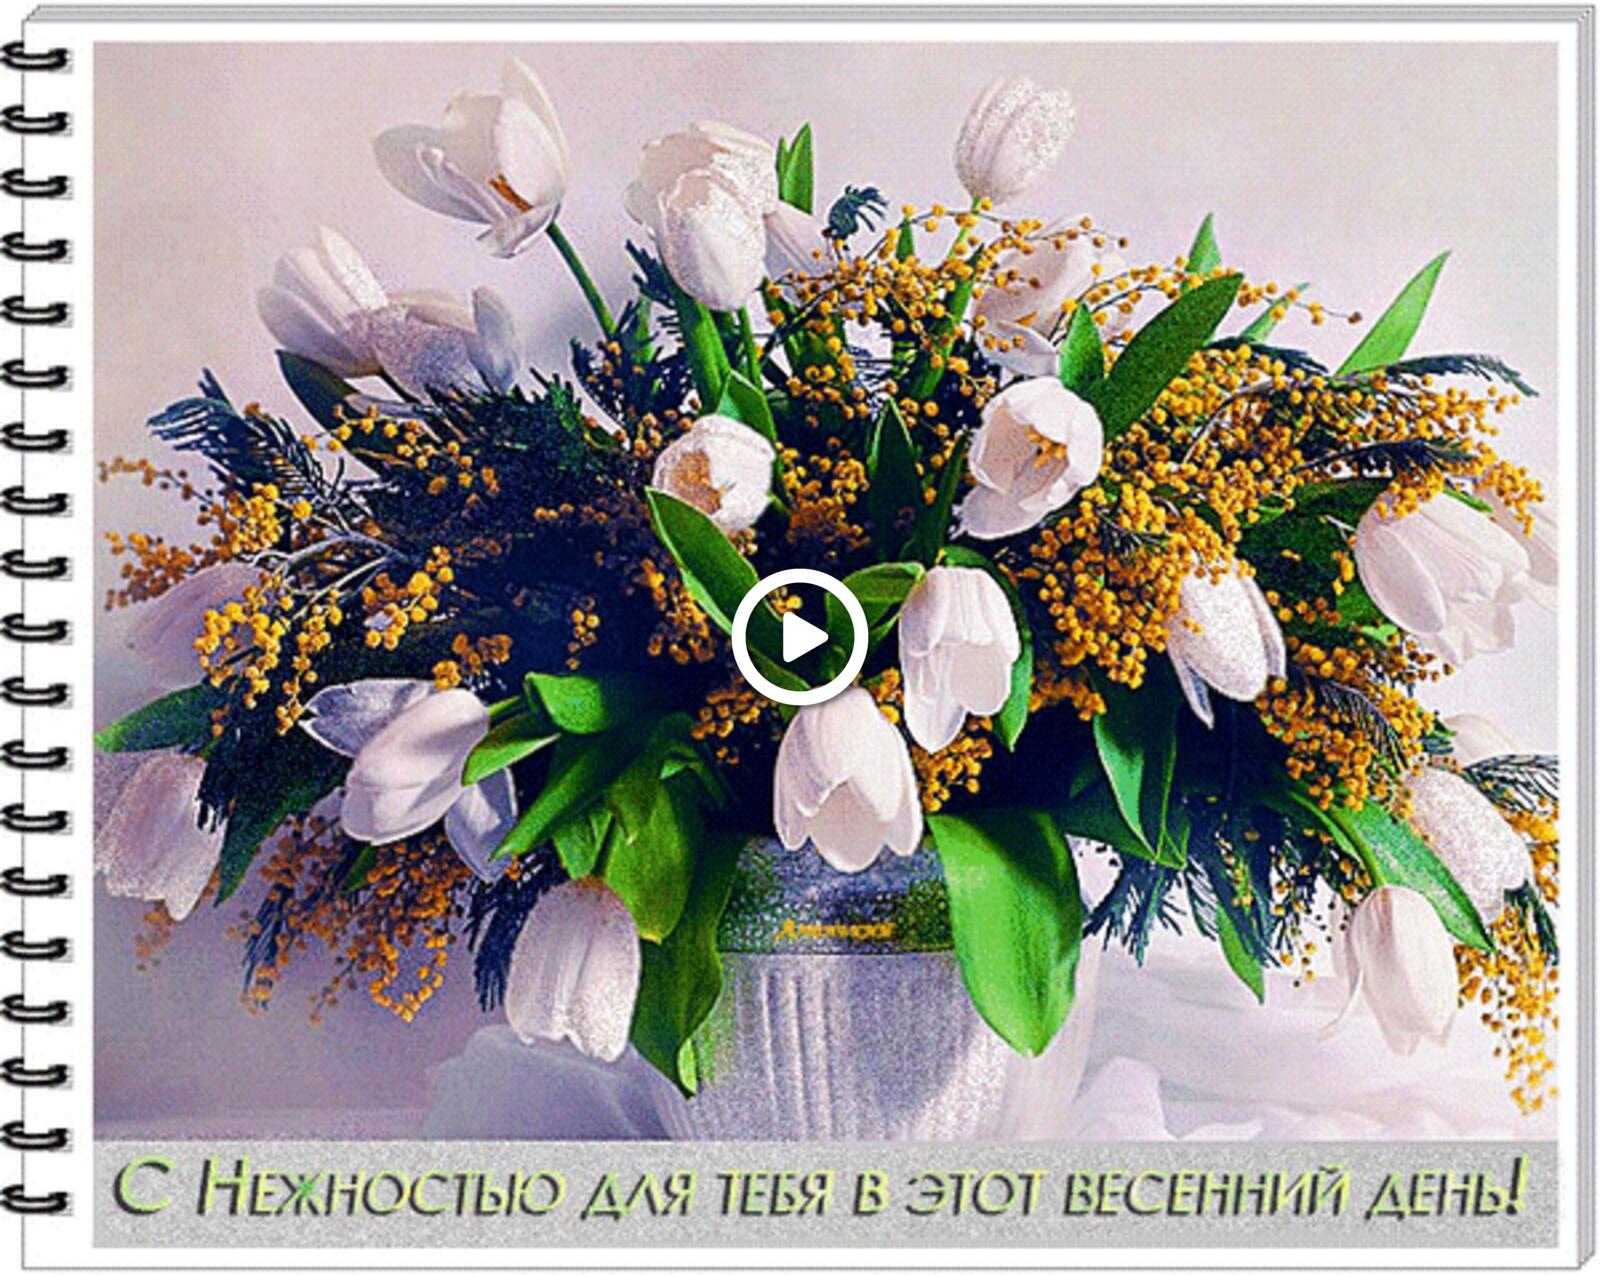 A postcard on the subject of flower vase flowers tulips for free